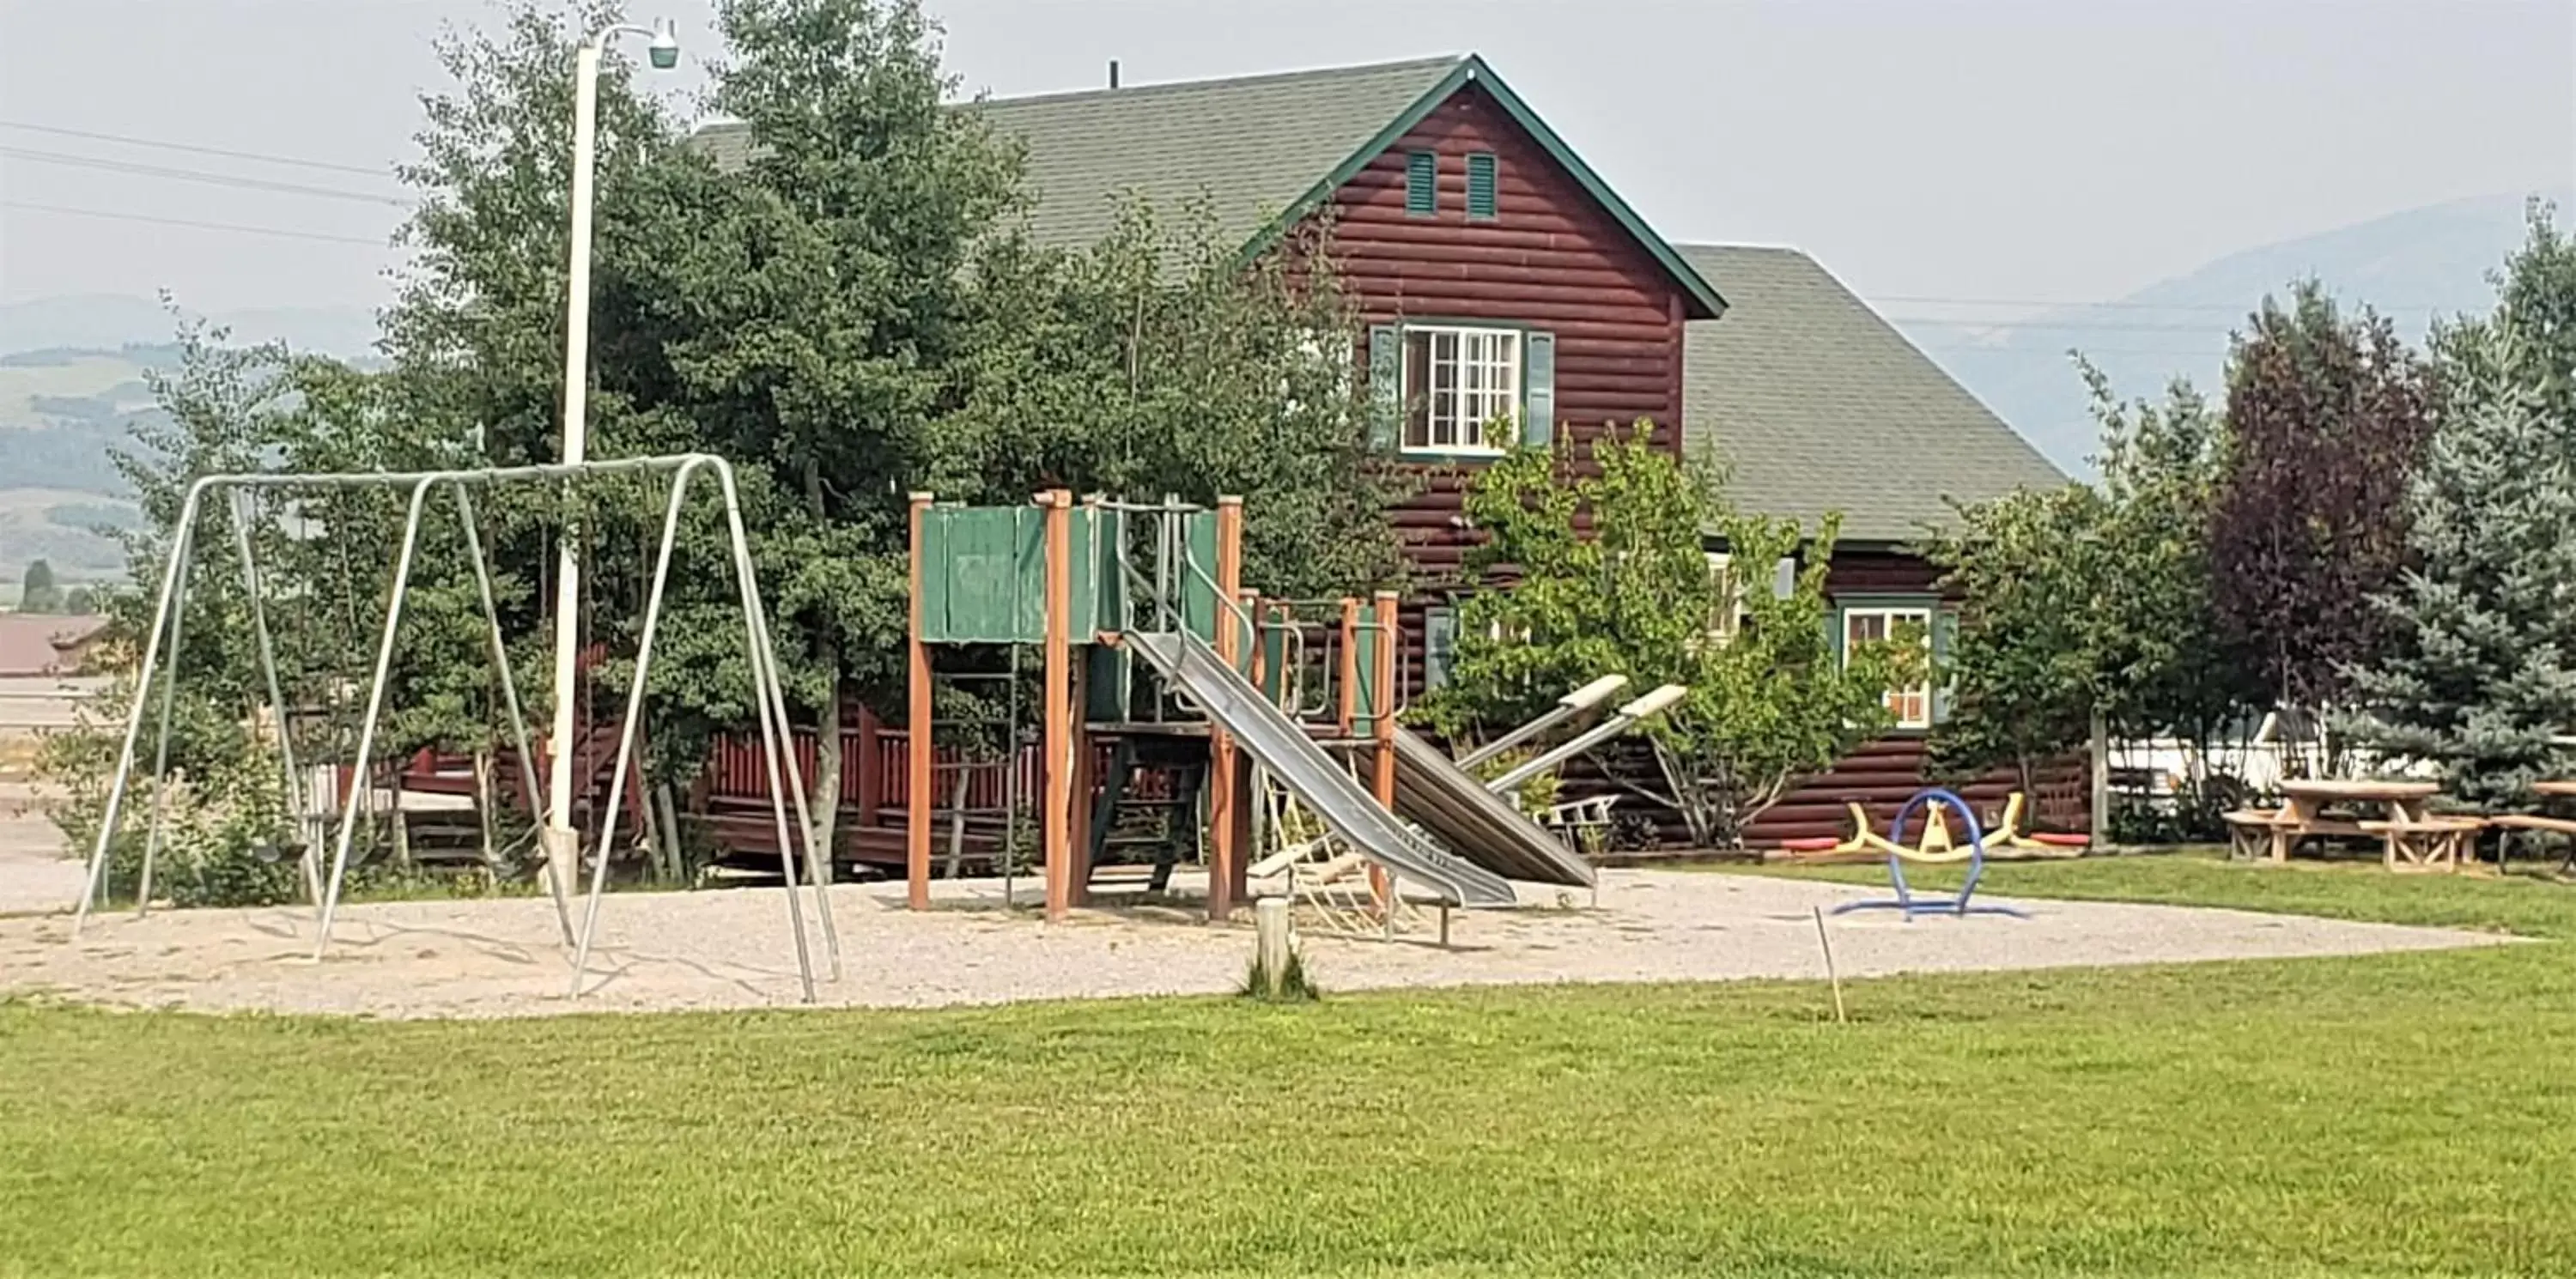 Children play ground, Property Building in Wolf Den Log Cabin Motel and RV Park